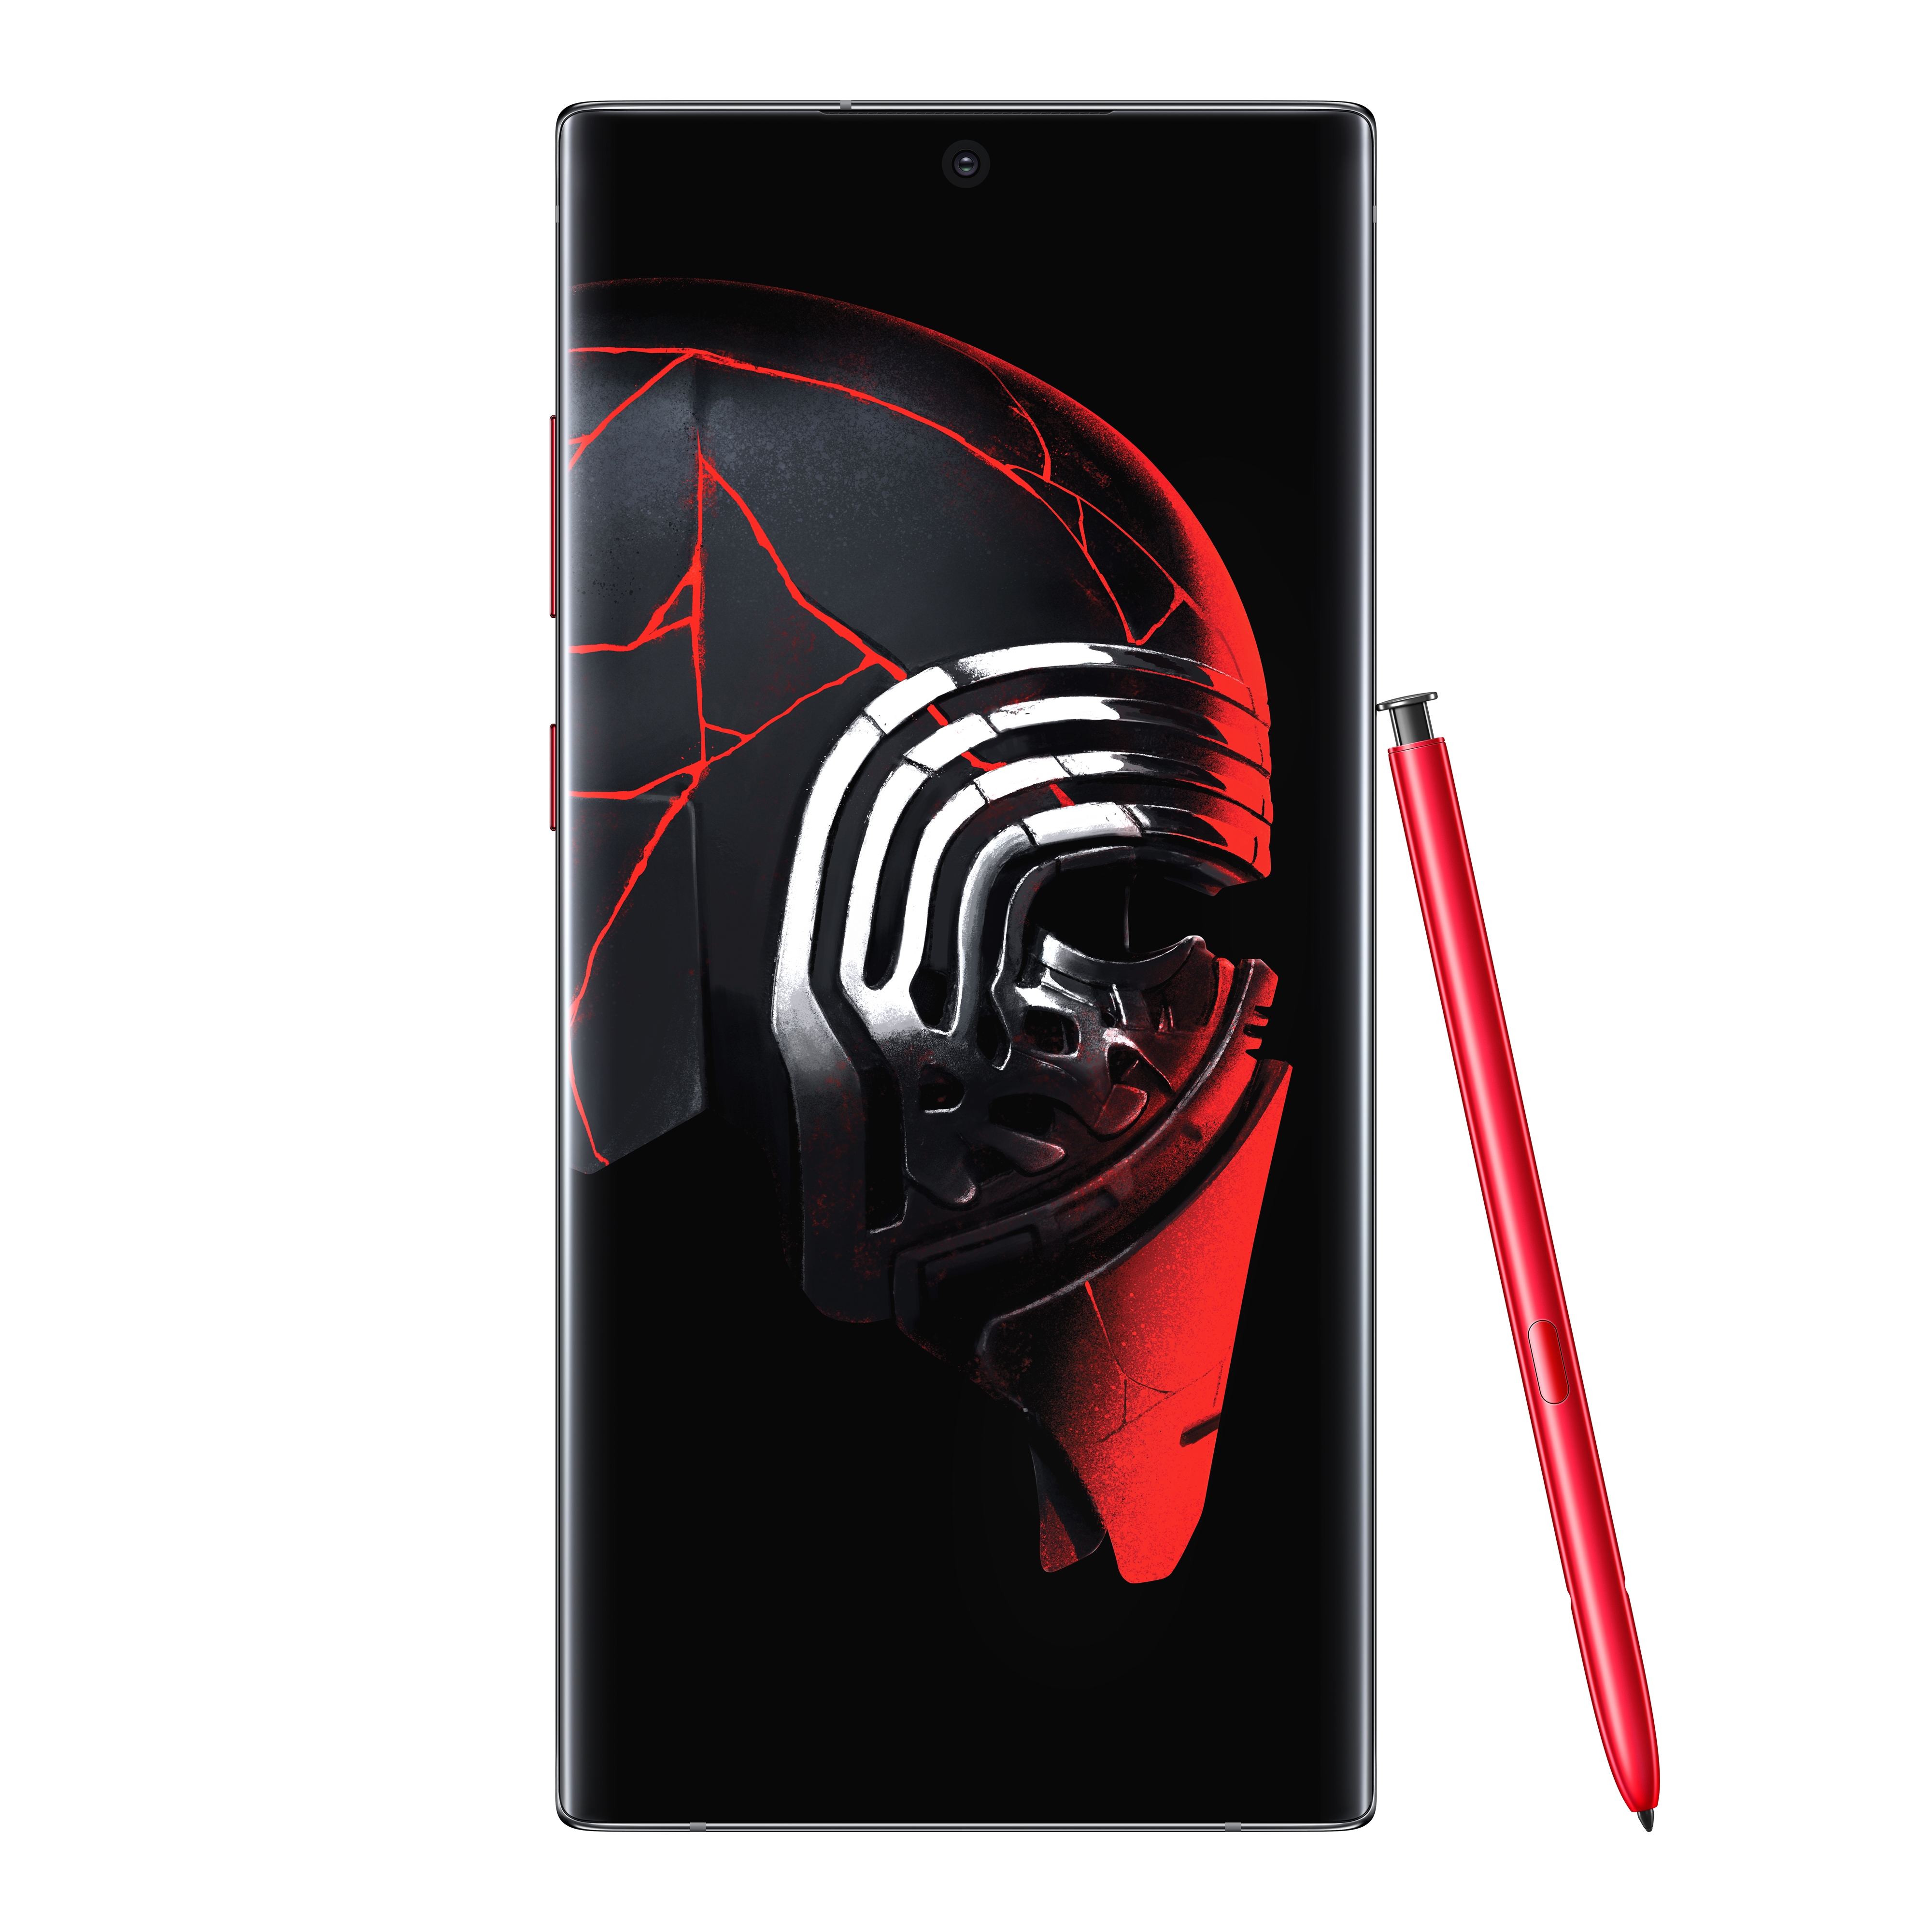 Starwars Edition Note10 Front - Note 10 Plus Star Wars - HD Wallpaper 